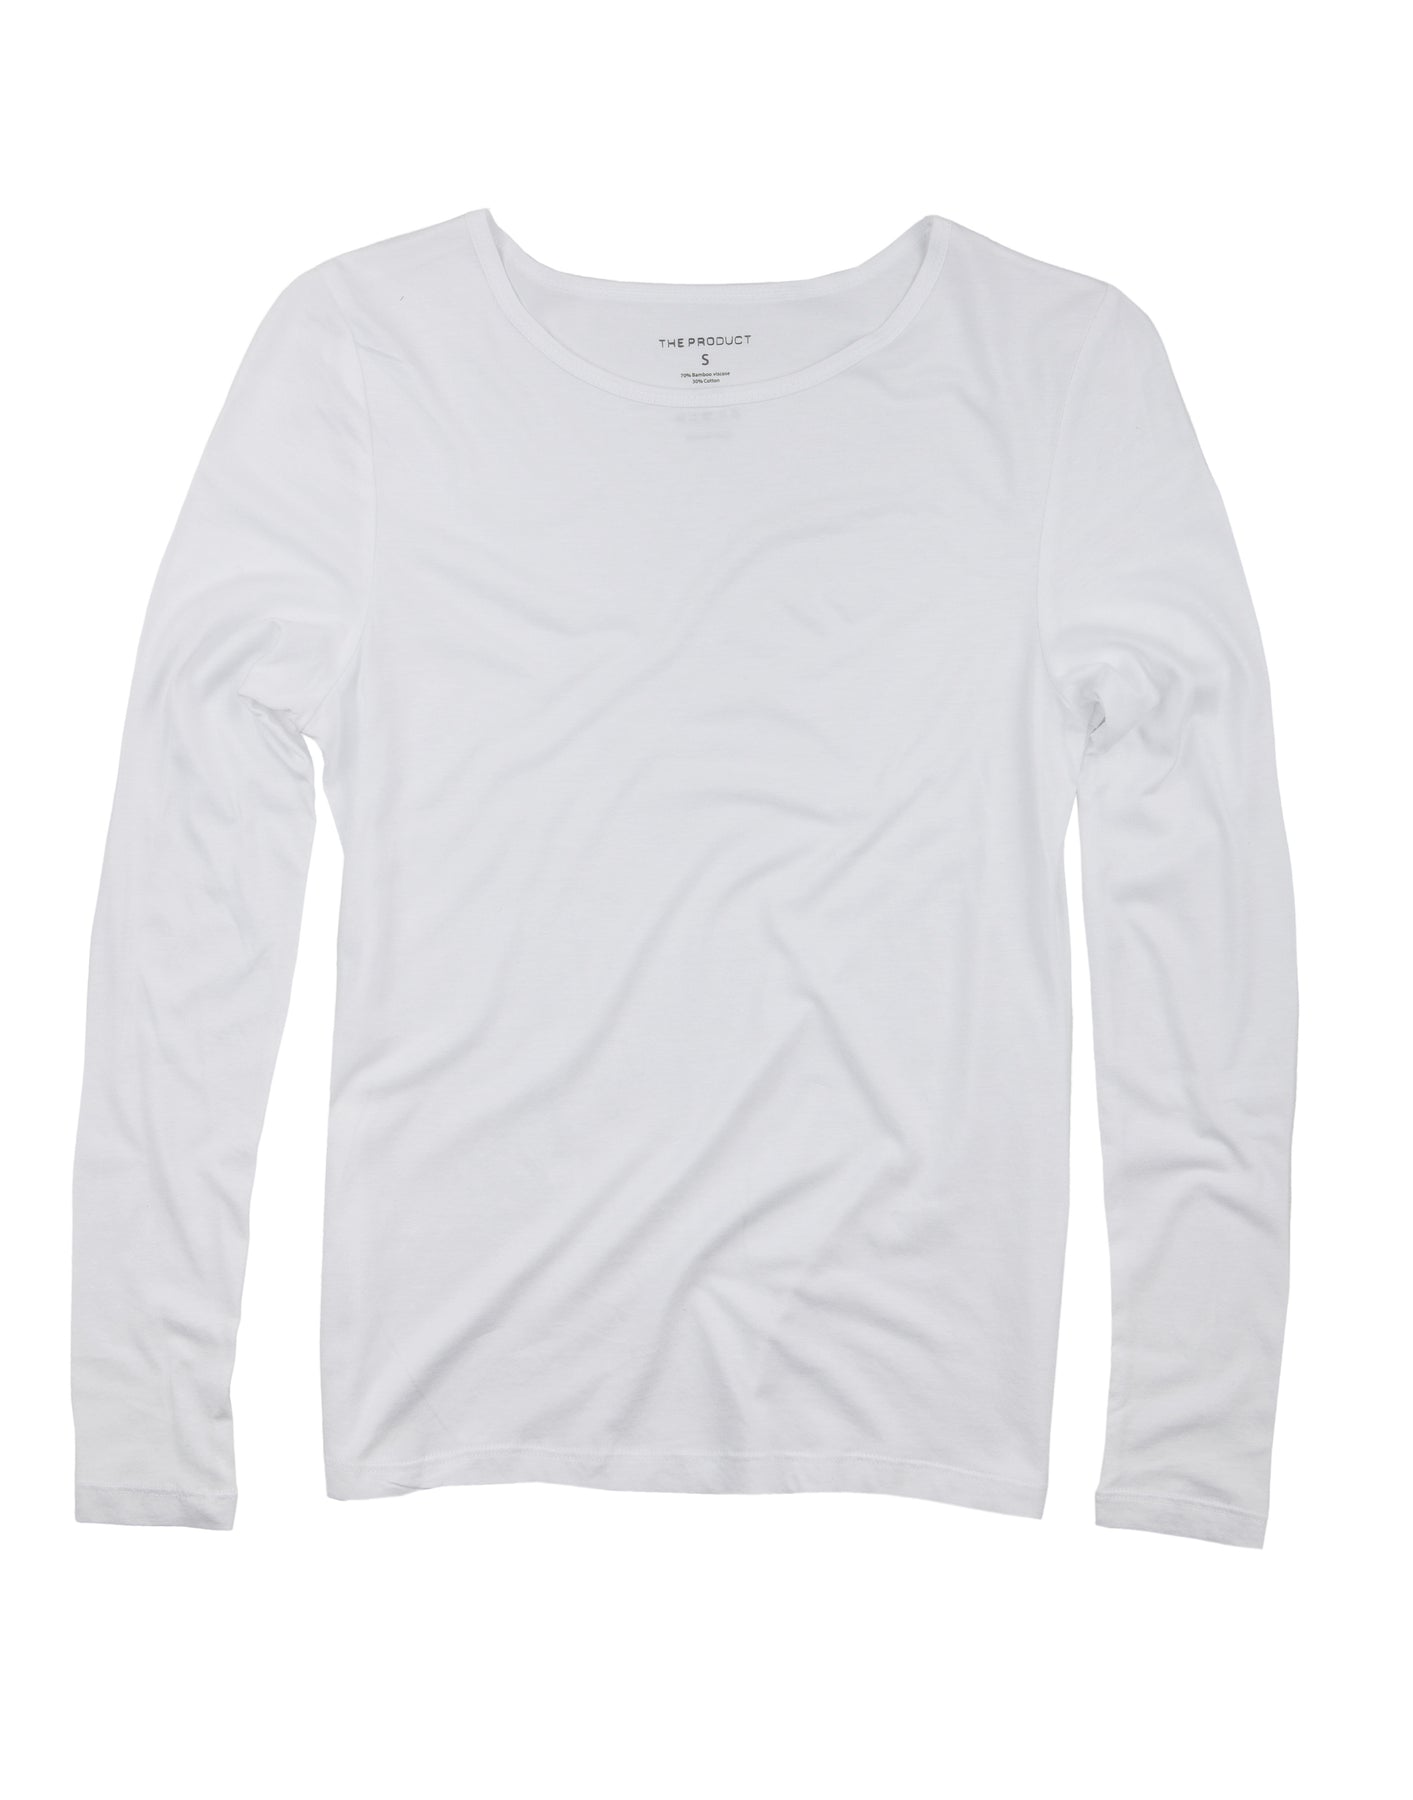 Women's Long Sleeve - White - The Product - Gensere - VILLOID.no